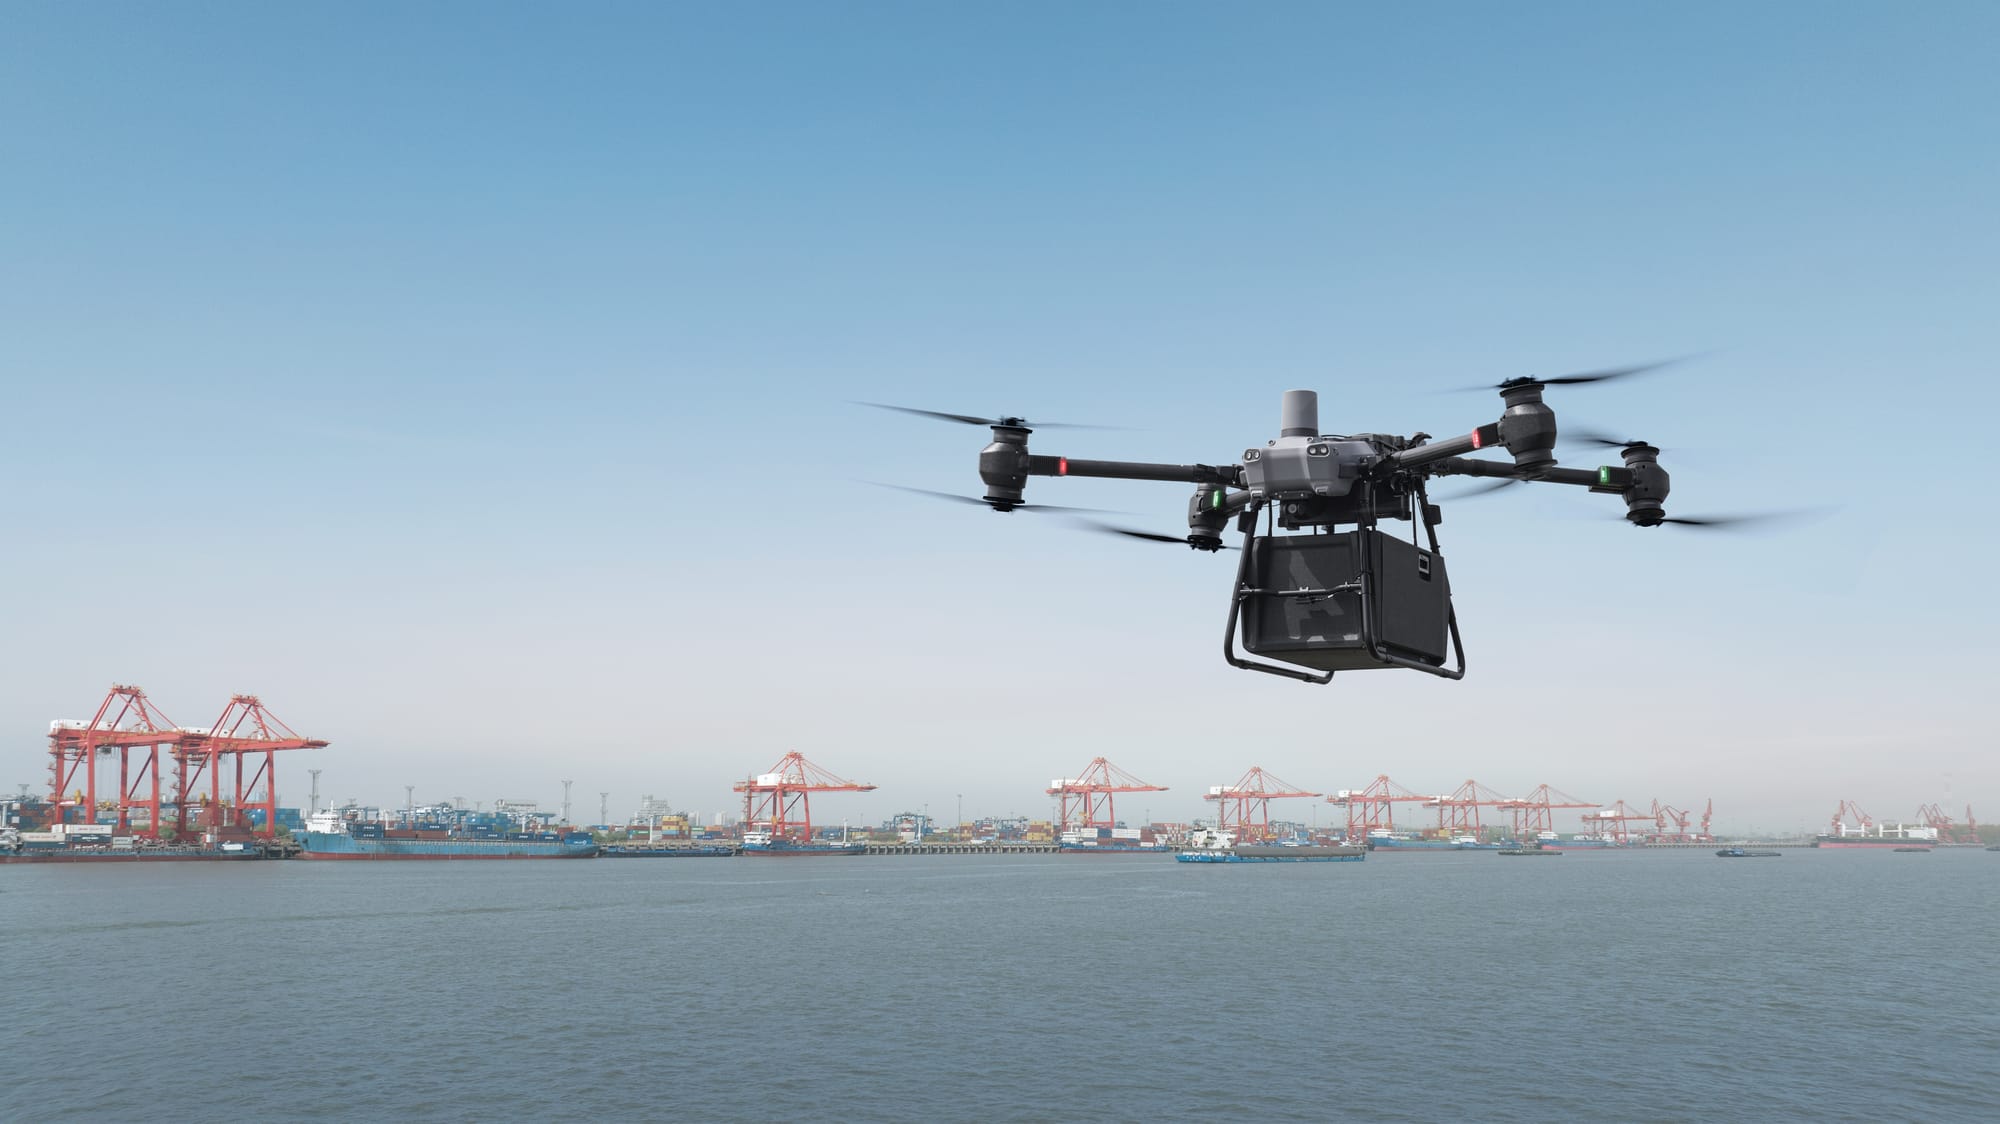 Image of a delivery drone over open water near a cargo ship depot.